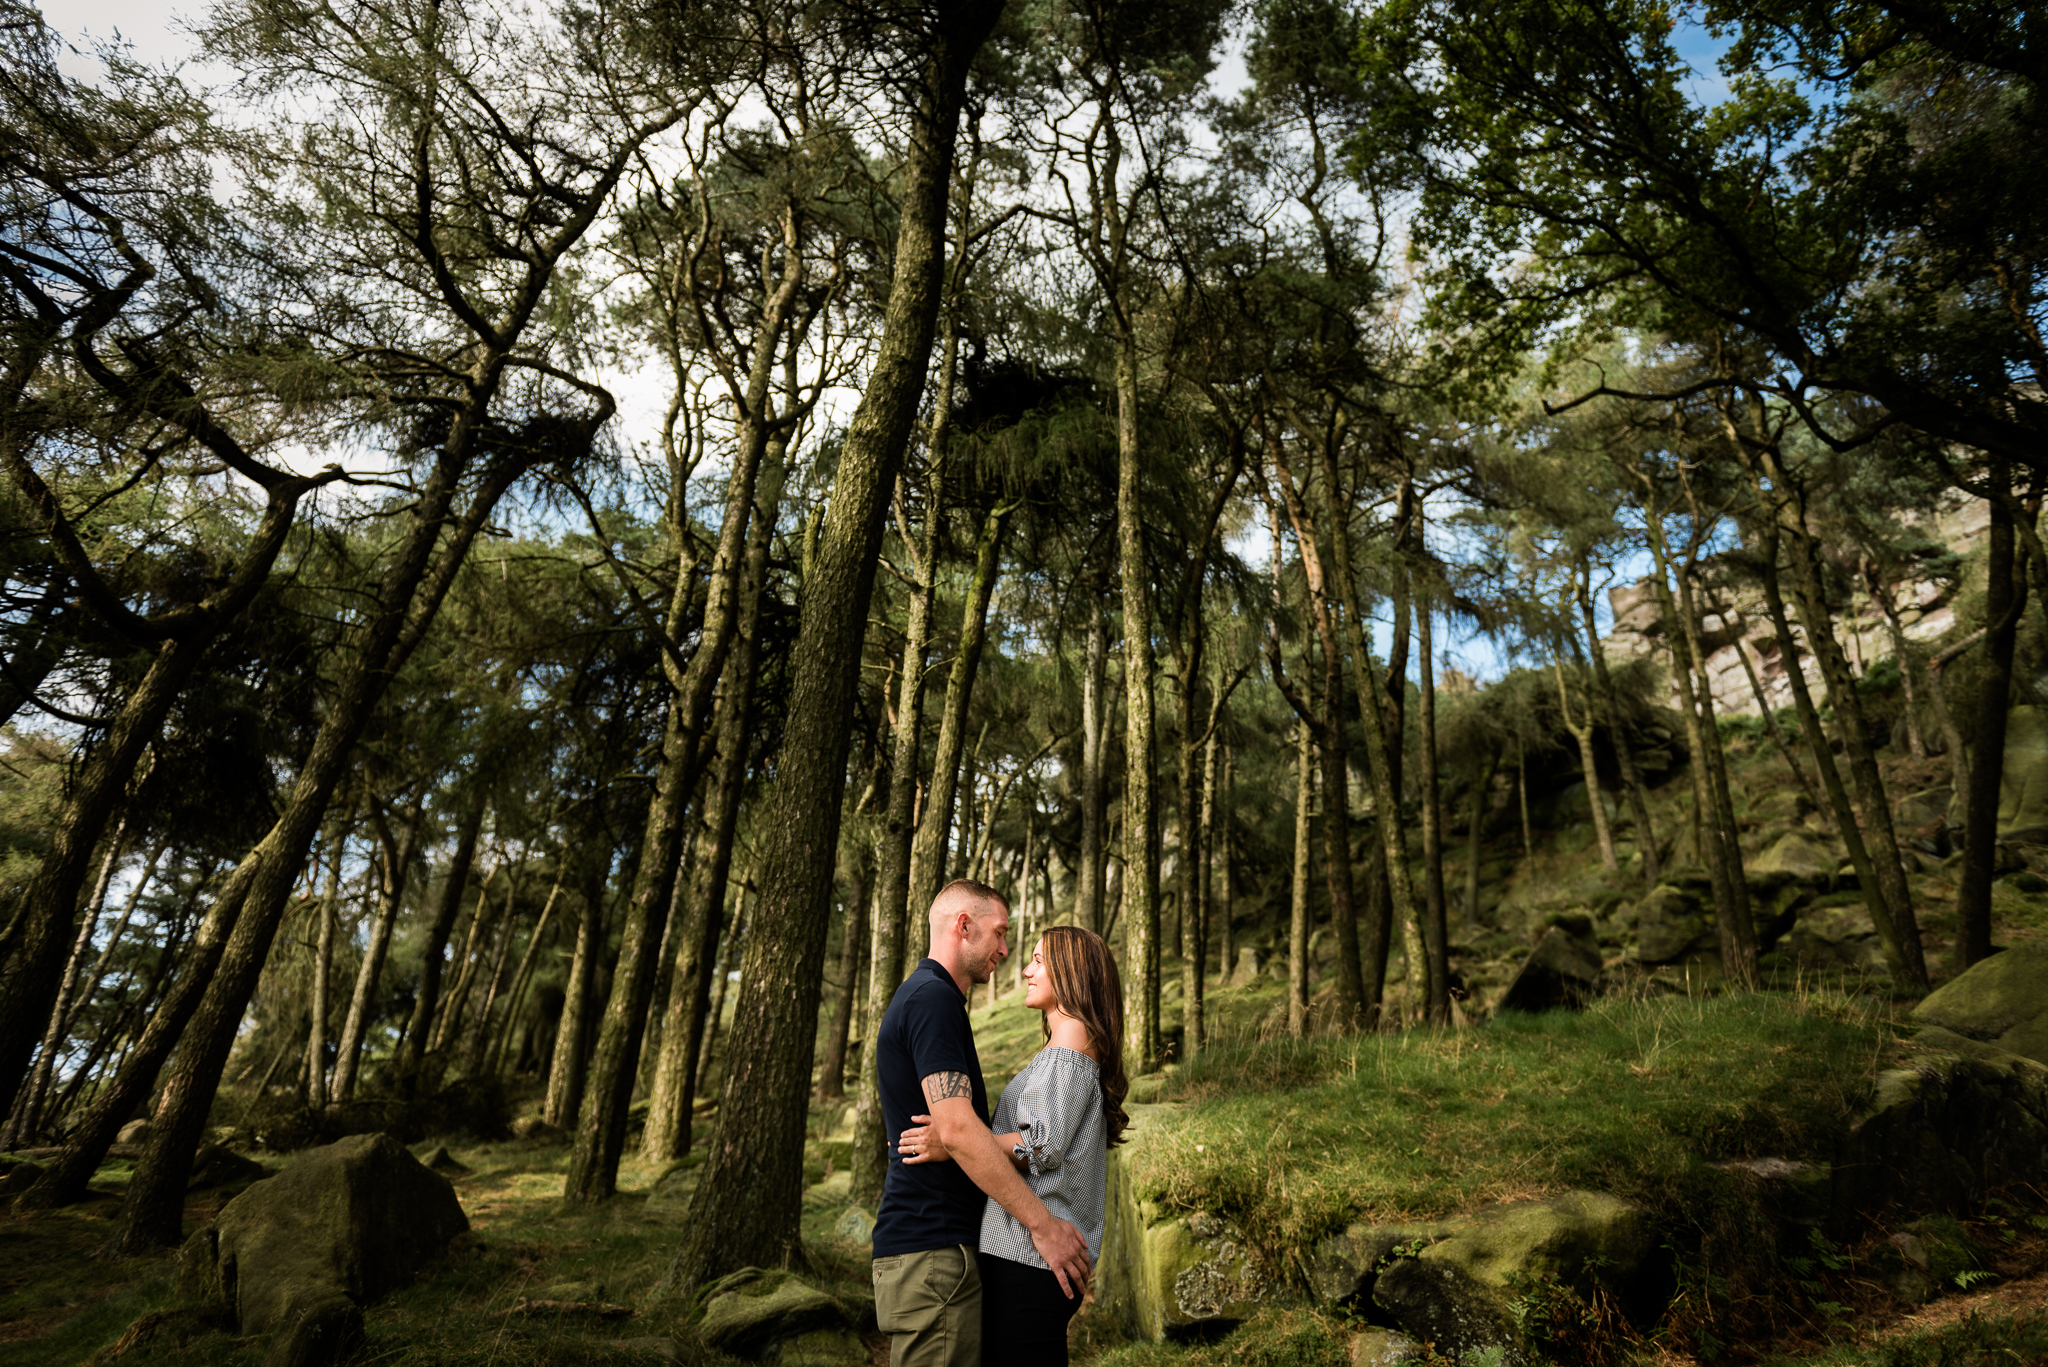 Pre-Wedding Family Photography, The Roaches, Peak District, Staffordshire Moorlands - Jenny Harper-4.jpg